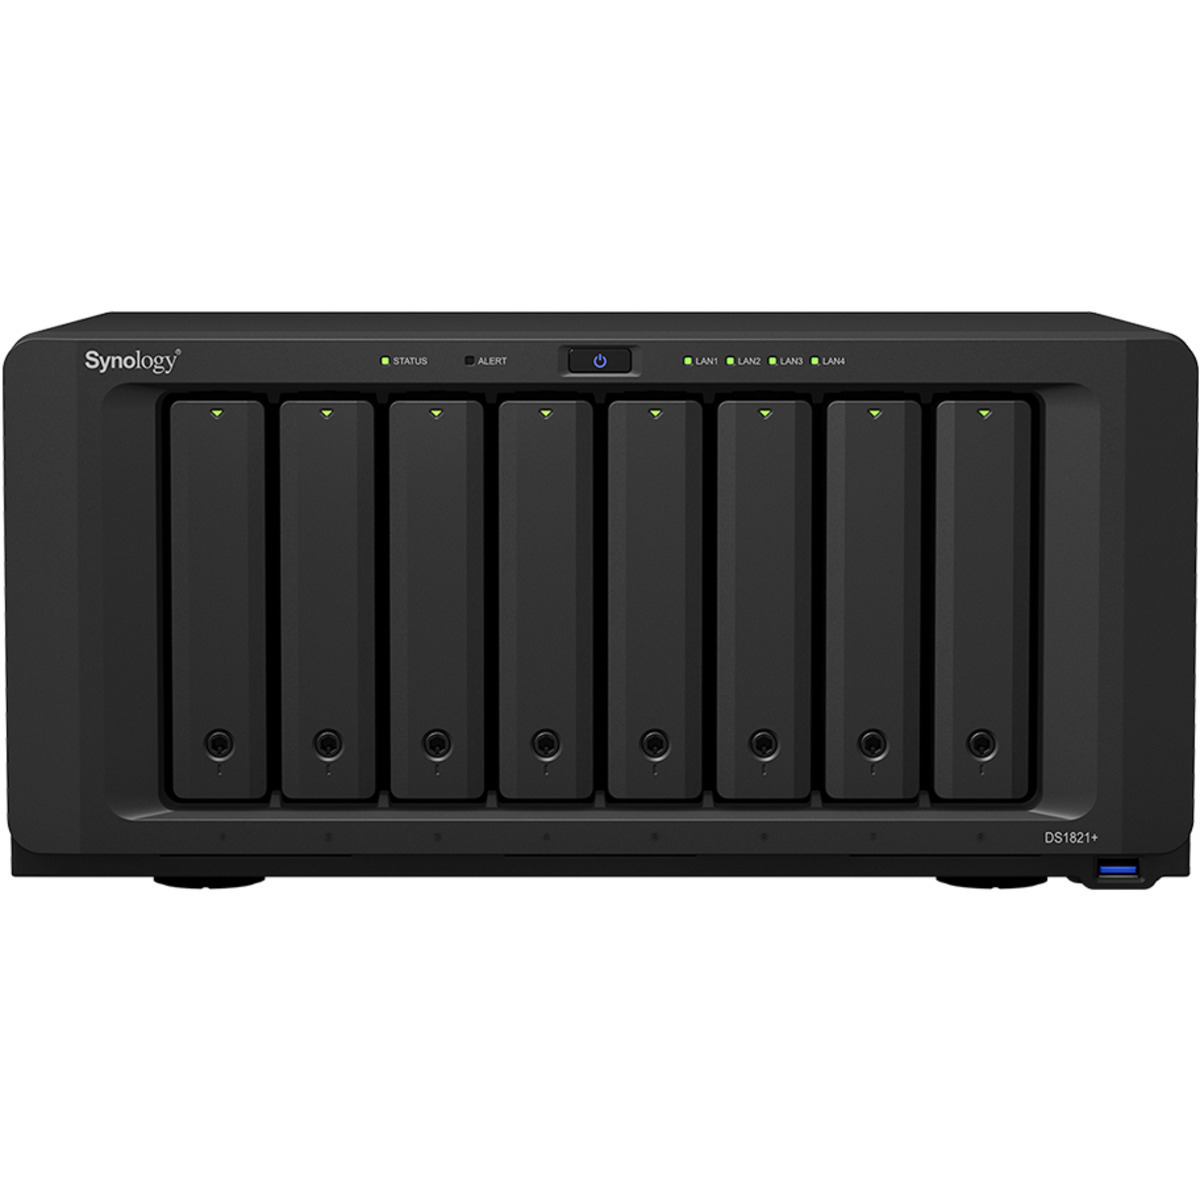 Synology DiskStation DS1821+ 96tb 8-Bay Desktop Multimedia / Power User / Business NAS - Network Attached Storage Device 8x12tb Seagate EXOS X18 ST12000NM000J 3.5 7200rpm SATA 6Gb/s HDD ENTERPRISE Class Drives Installed - Burn-In Tested - FREE RAM UPGRADE DiskStation DS1821+